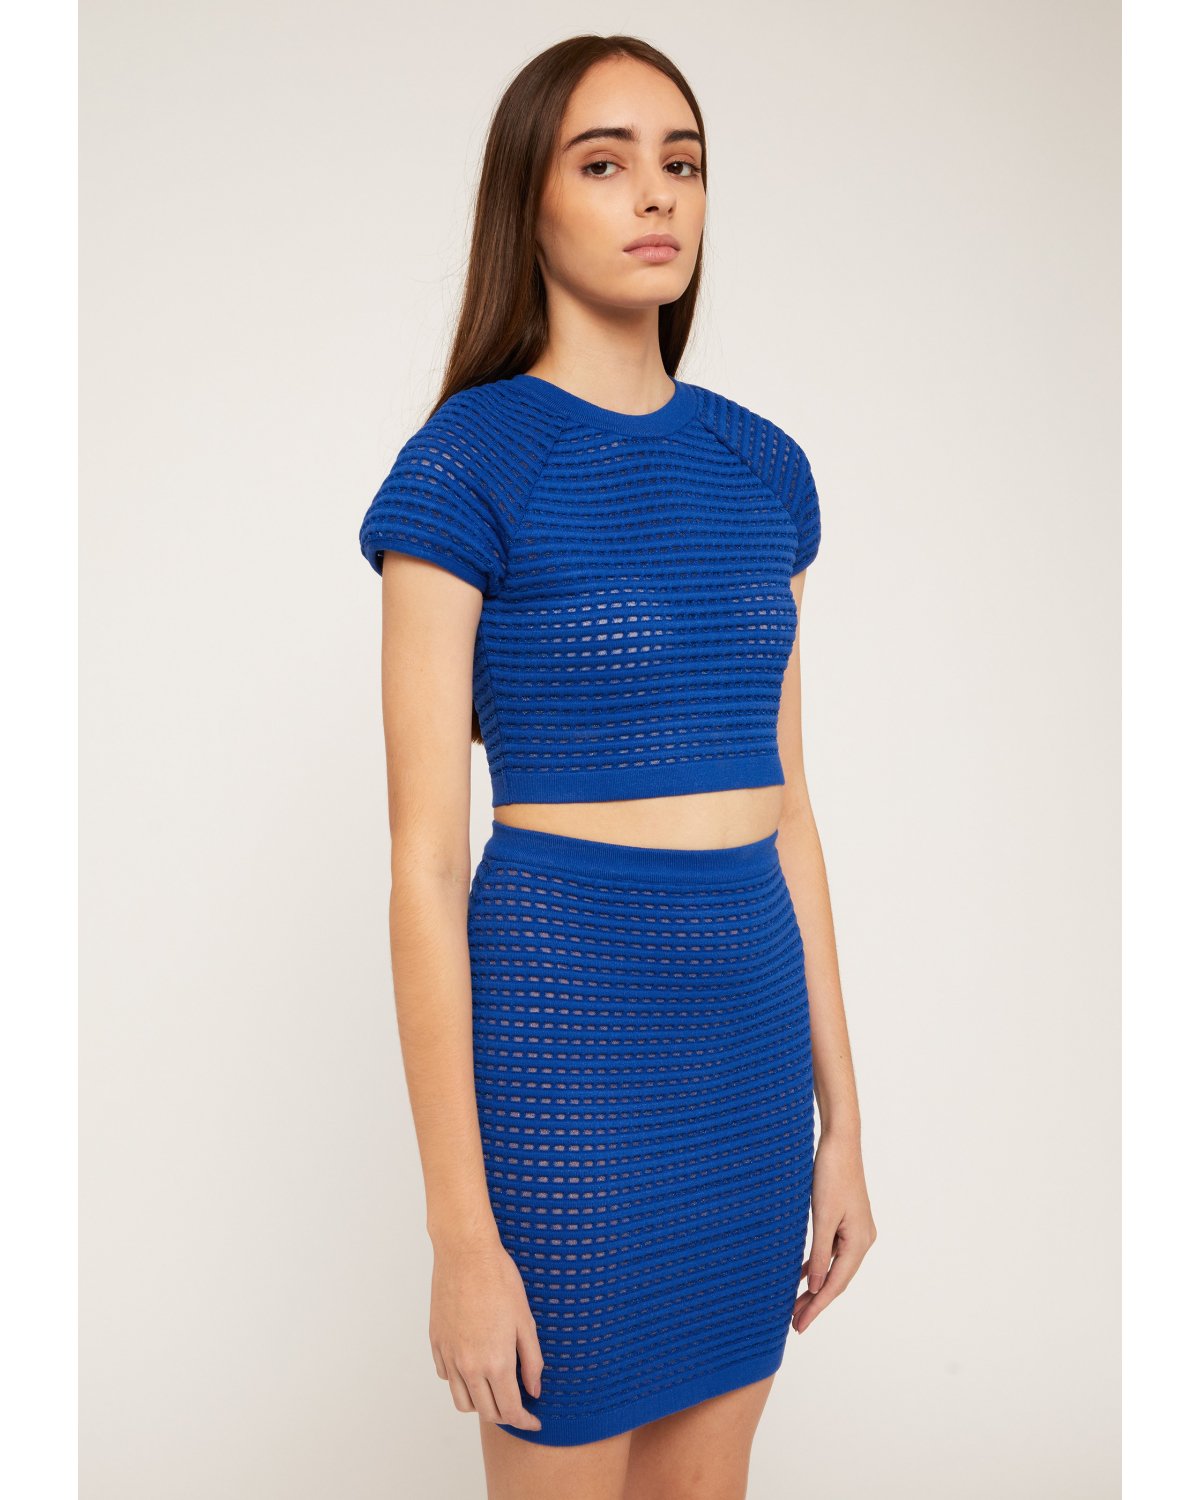 Blue iconic crop top | Iconic Capsule Collection, 73_74 | Genny